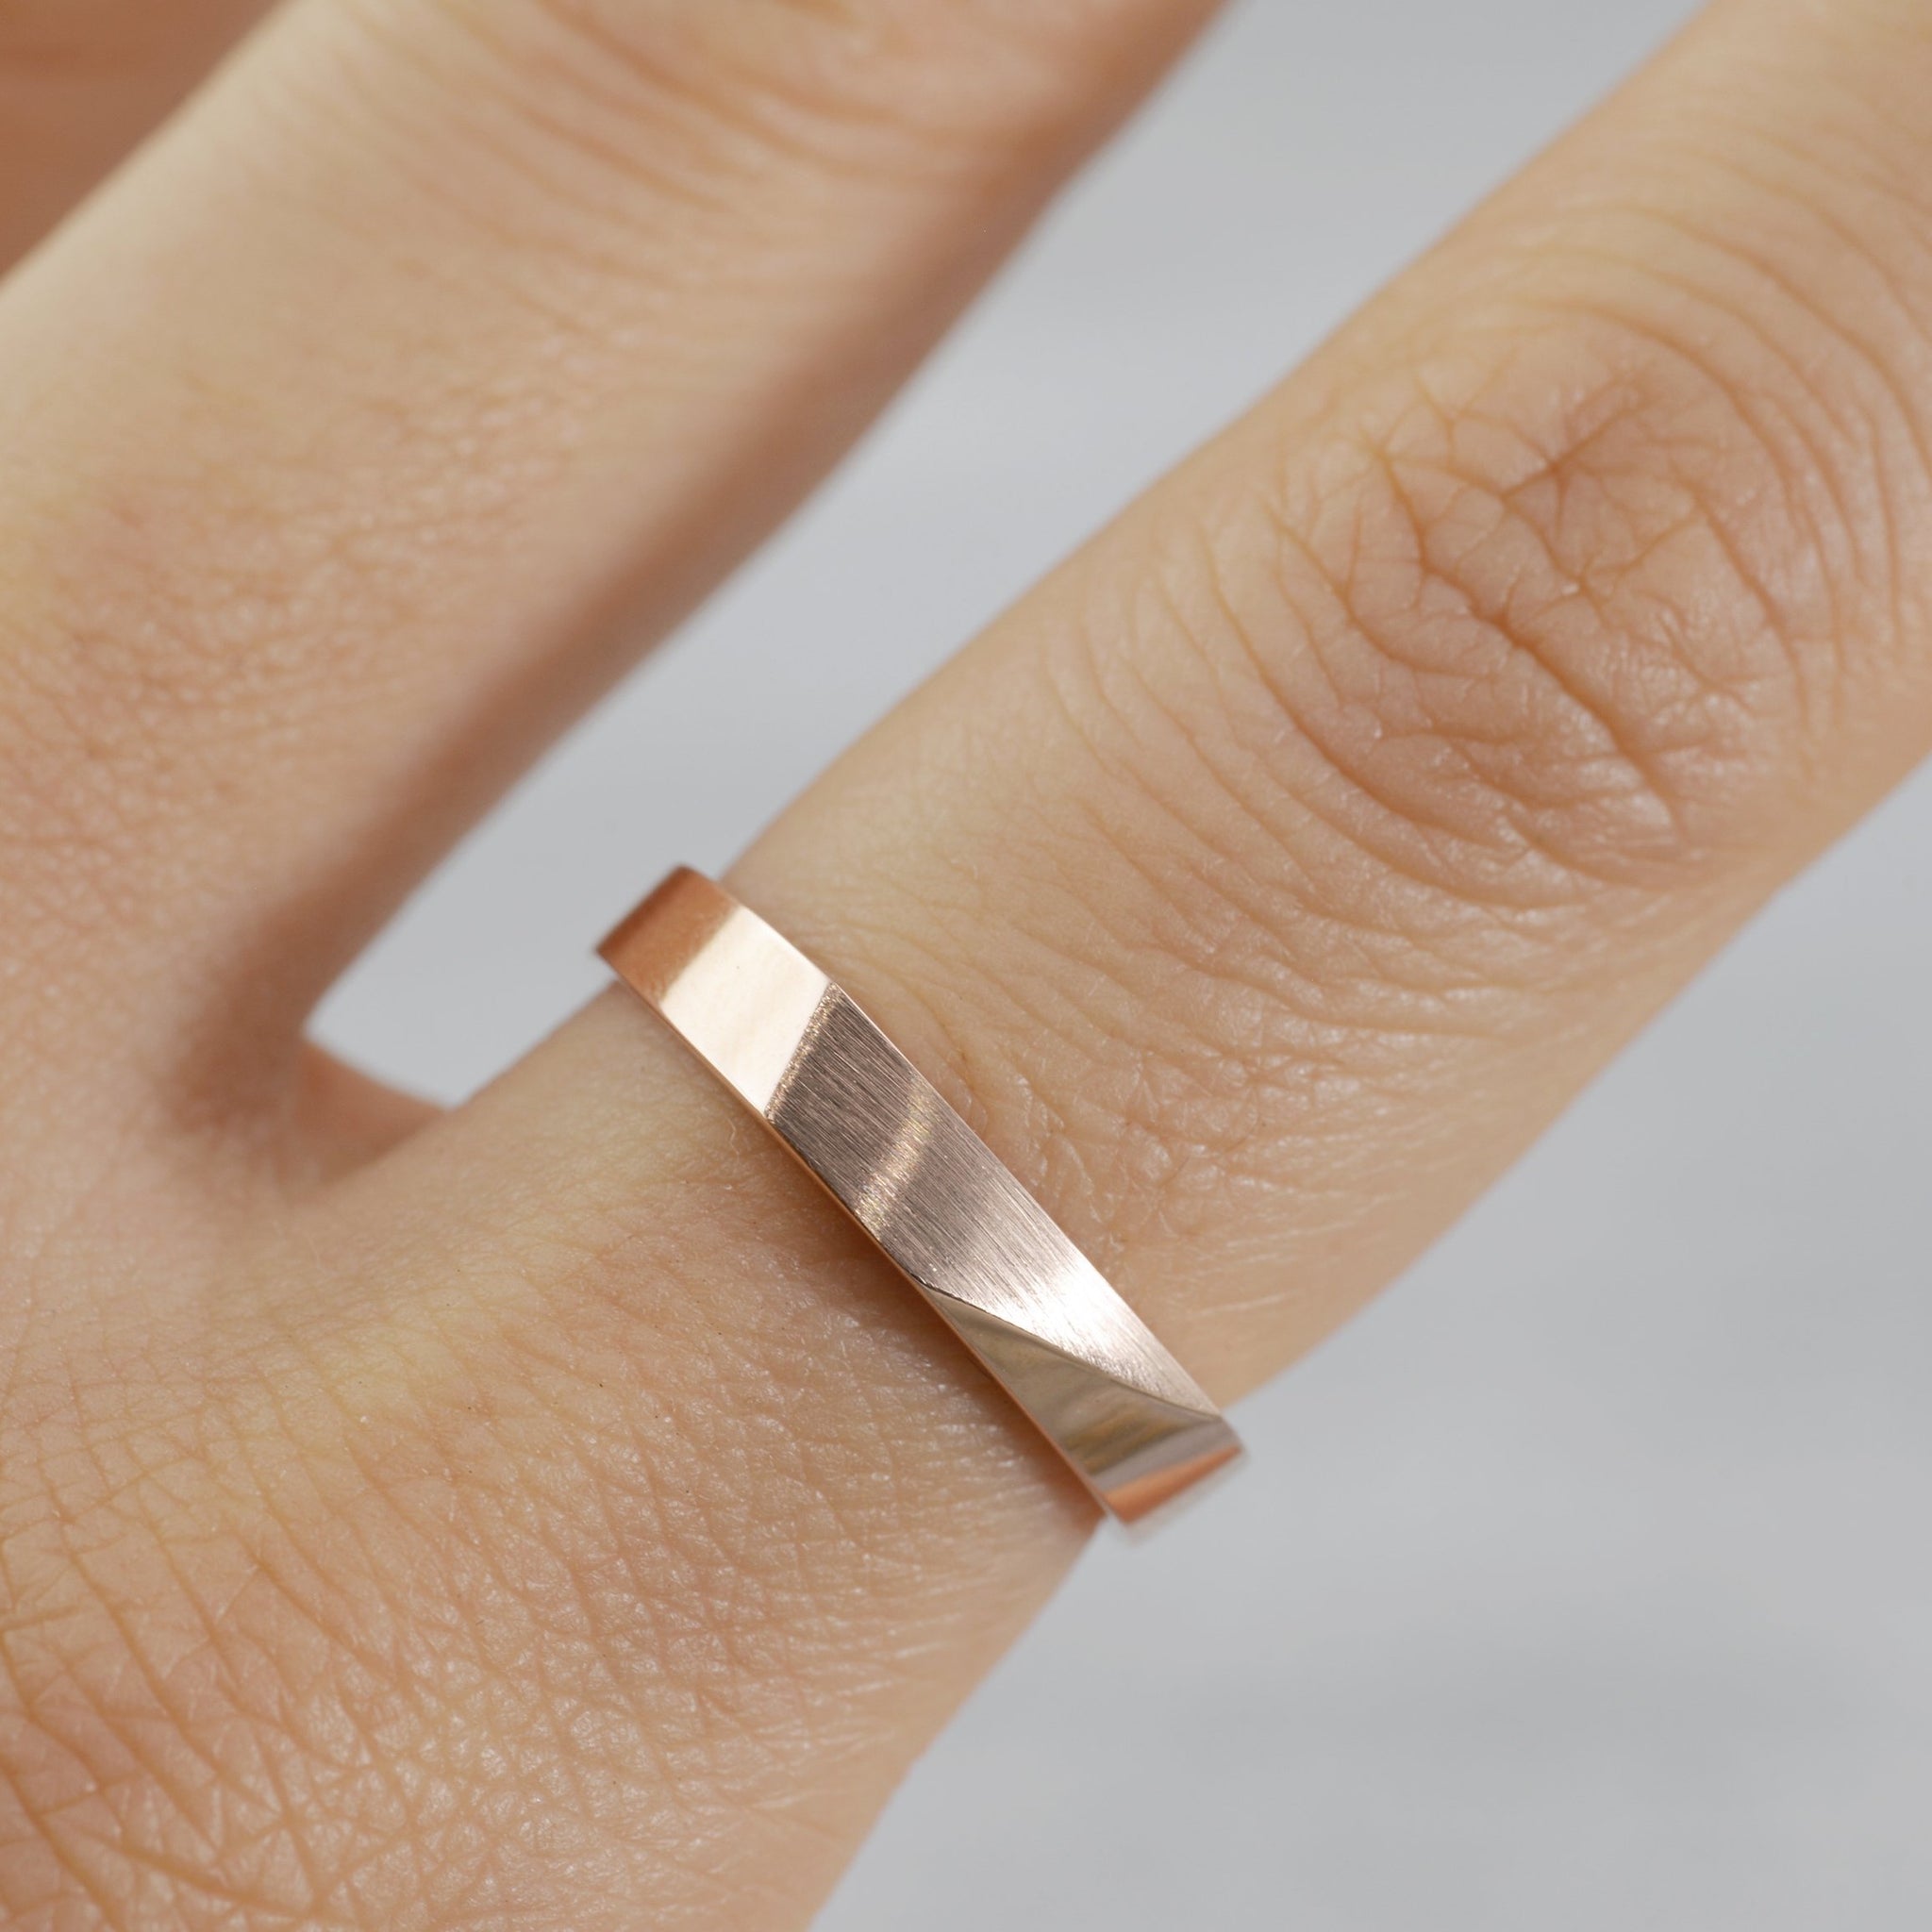 Edgy band Ring (3.5mm) - 14K/ 18K Gold